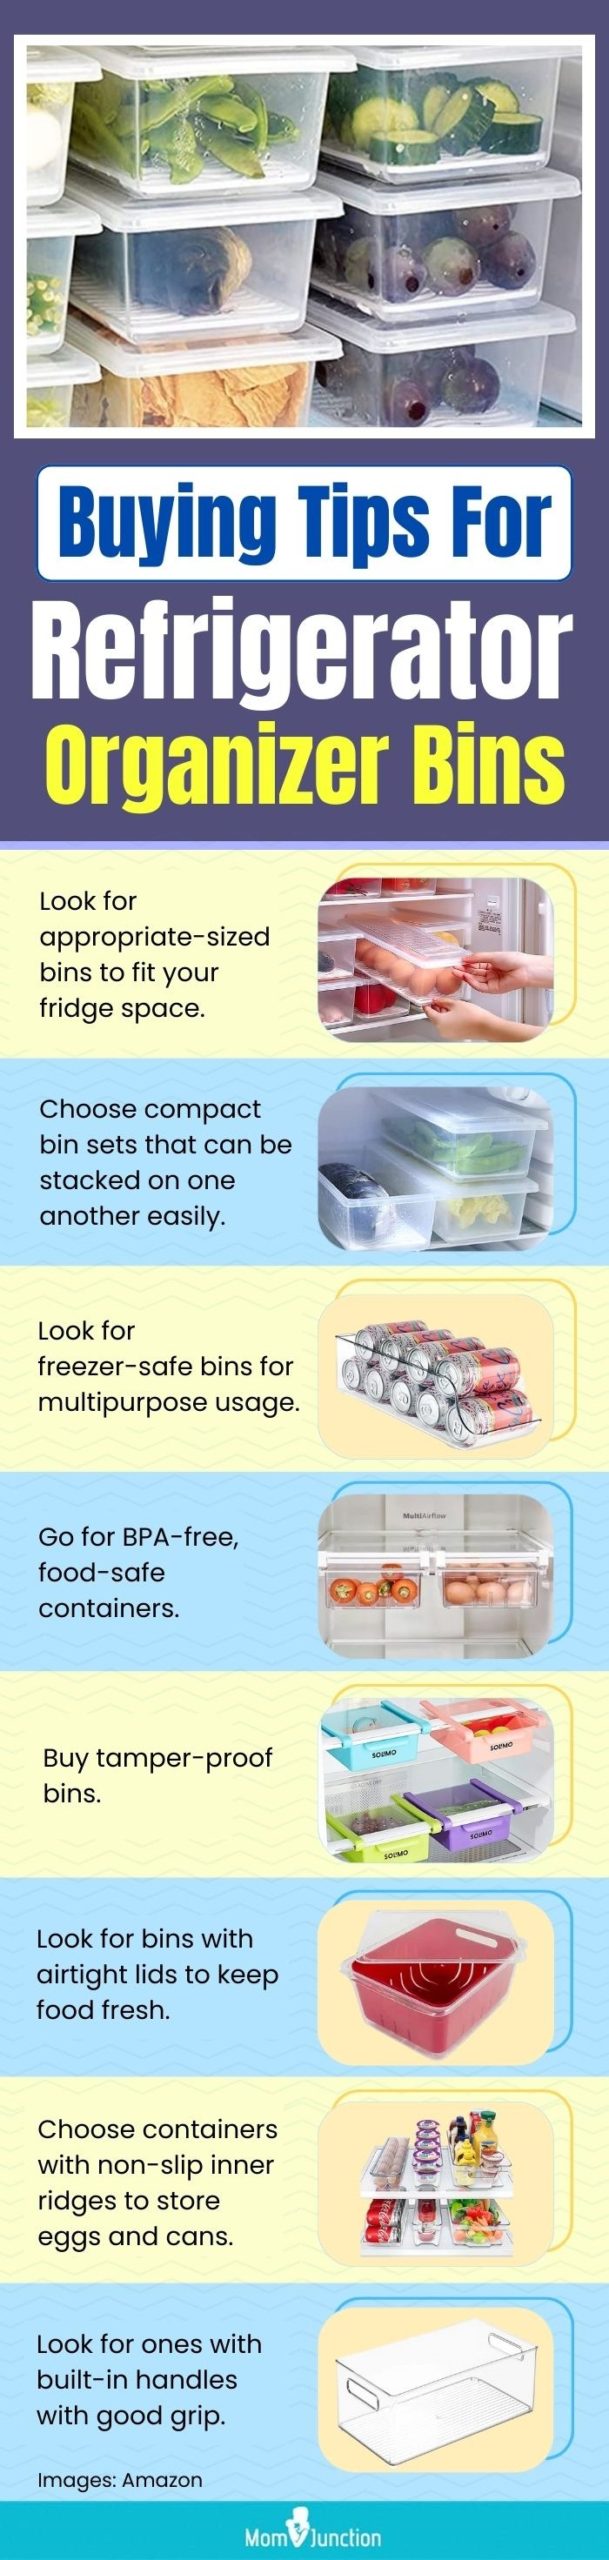 https://www.momjunction.com/wp-content/uploads/2021/08/Buying-Tips-For-Organizer-Bins-For-Your-Refrigerator-scaled.jpg